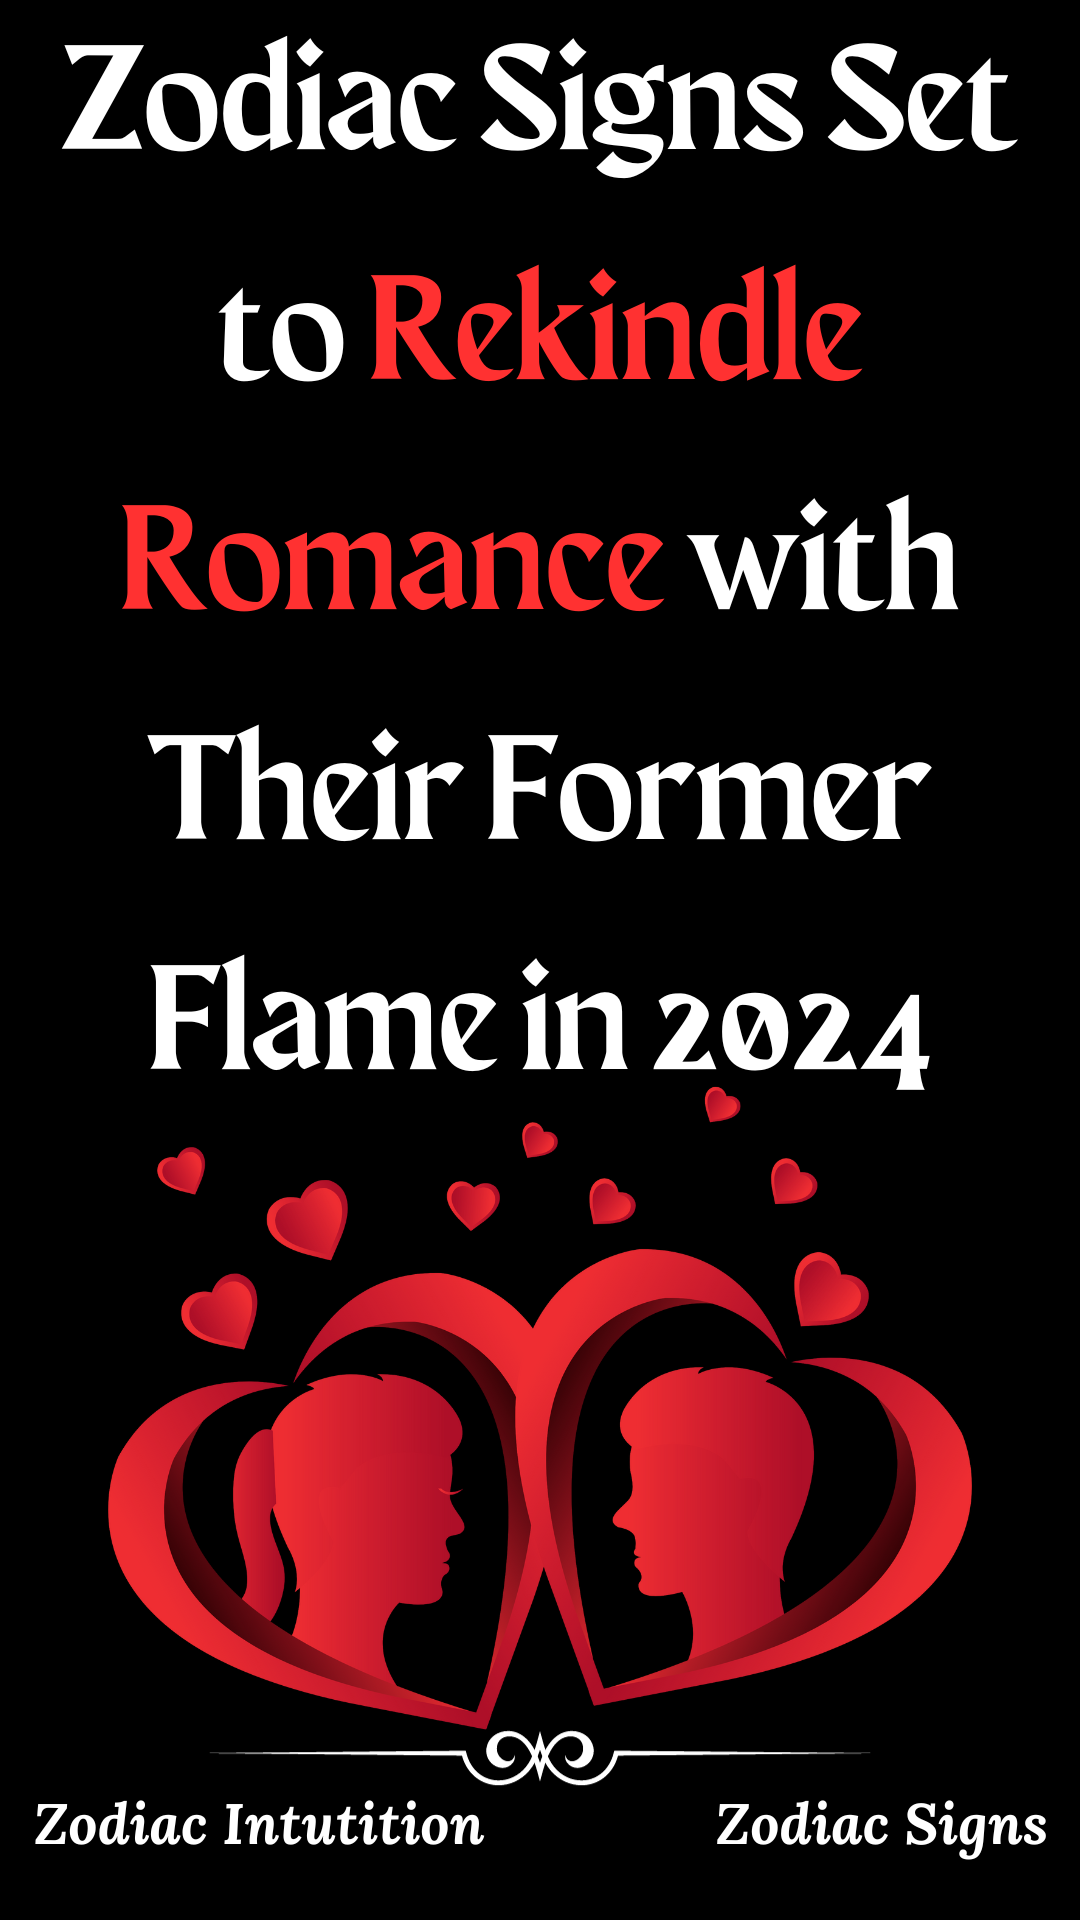 Zodiac Signs Set to Rekindle Romance with Their Former Flame in 2024